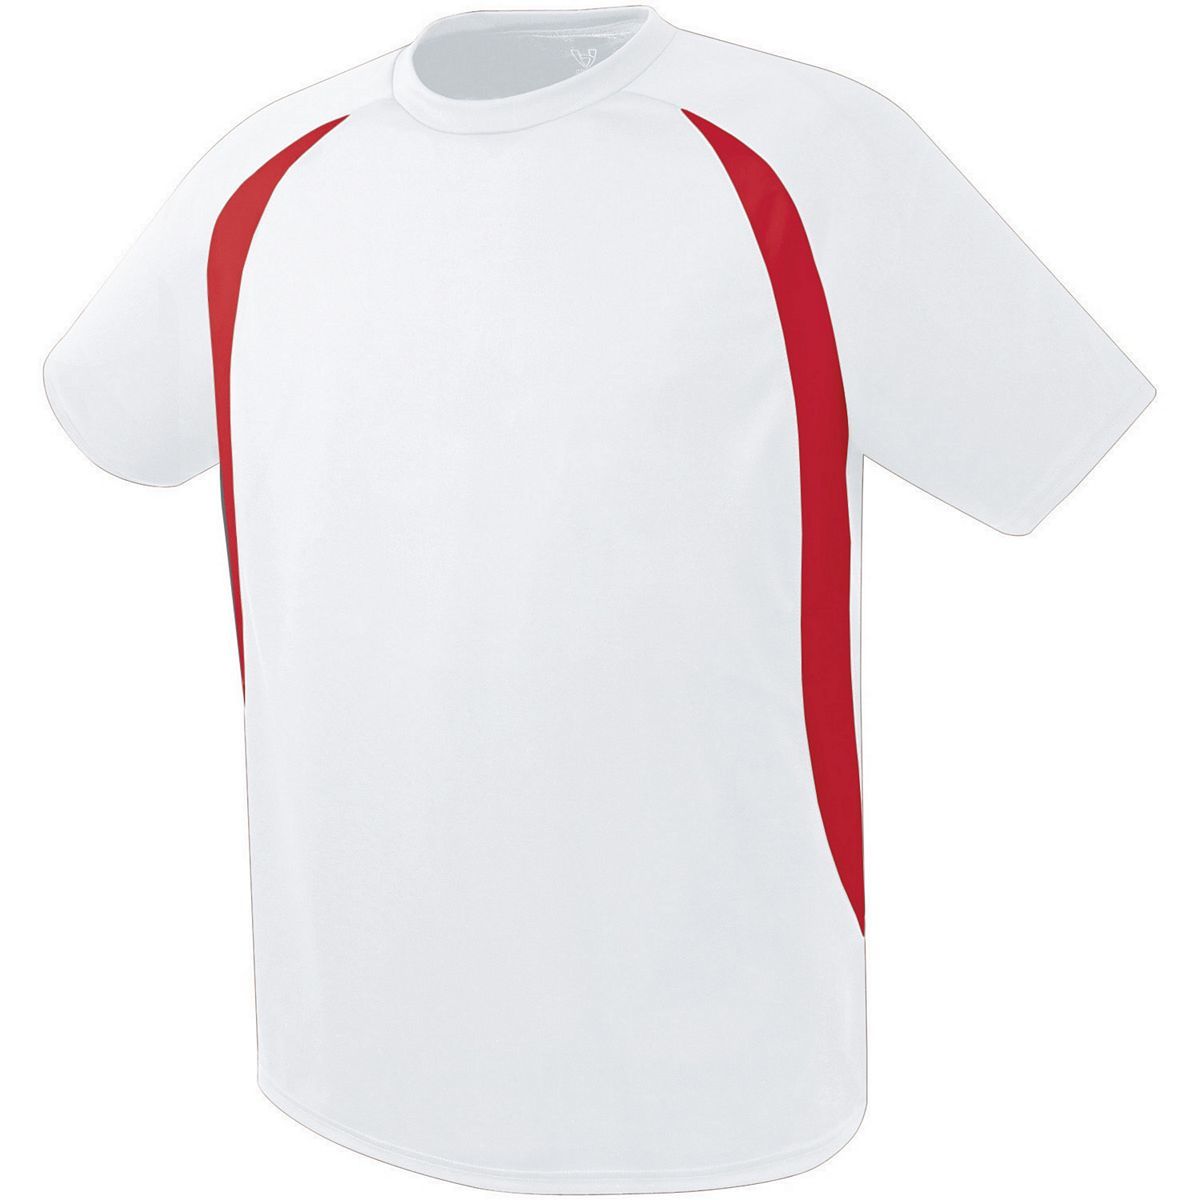 High 5 Youth Liberty Soccer Jersey in White/Scarlet  -Part of the Youth, Youth-Jersey, High5-Products, Soccer, Shirts, All-Sports-1 product lines at KanaleyCreations.com